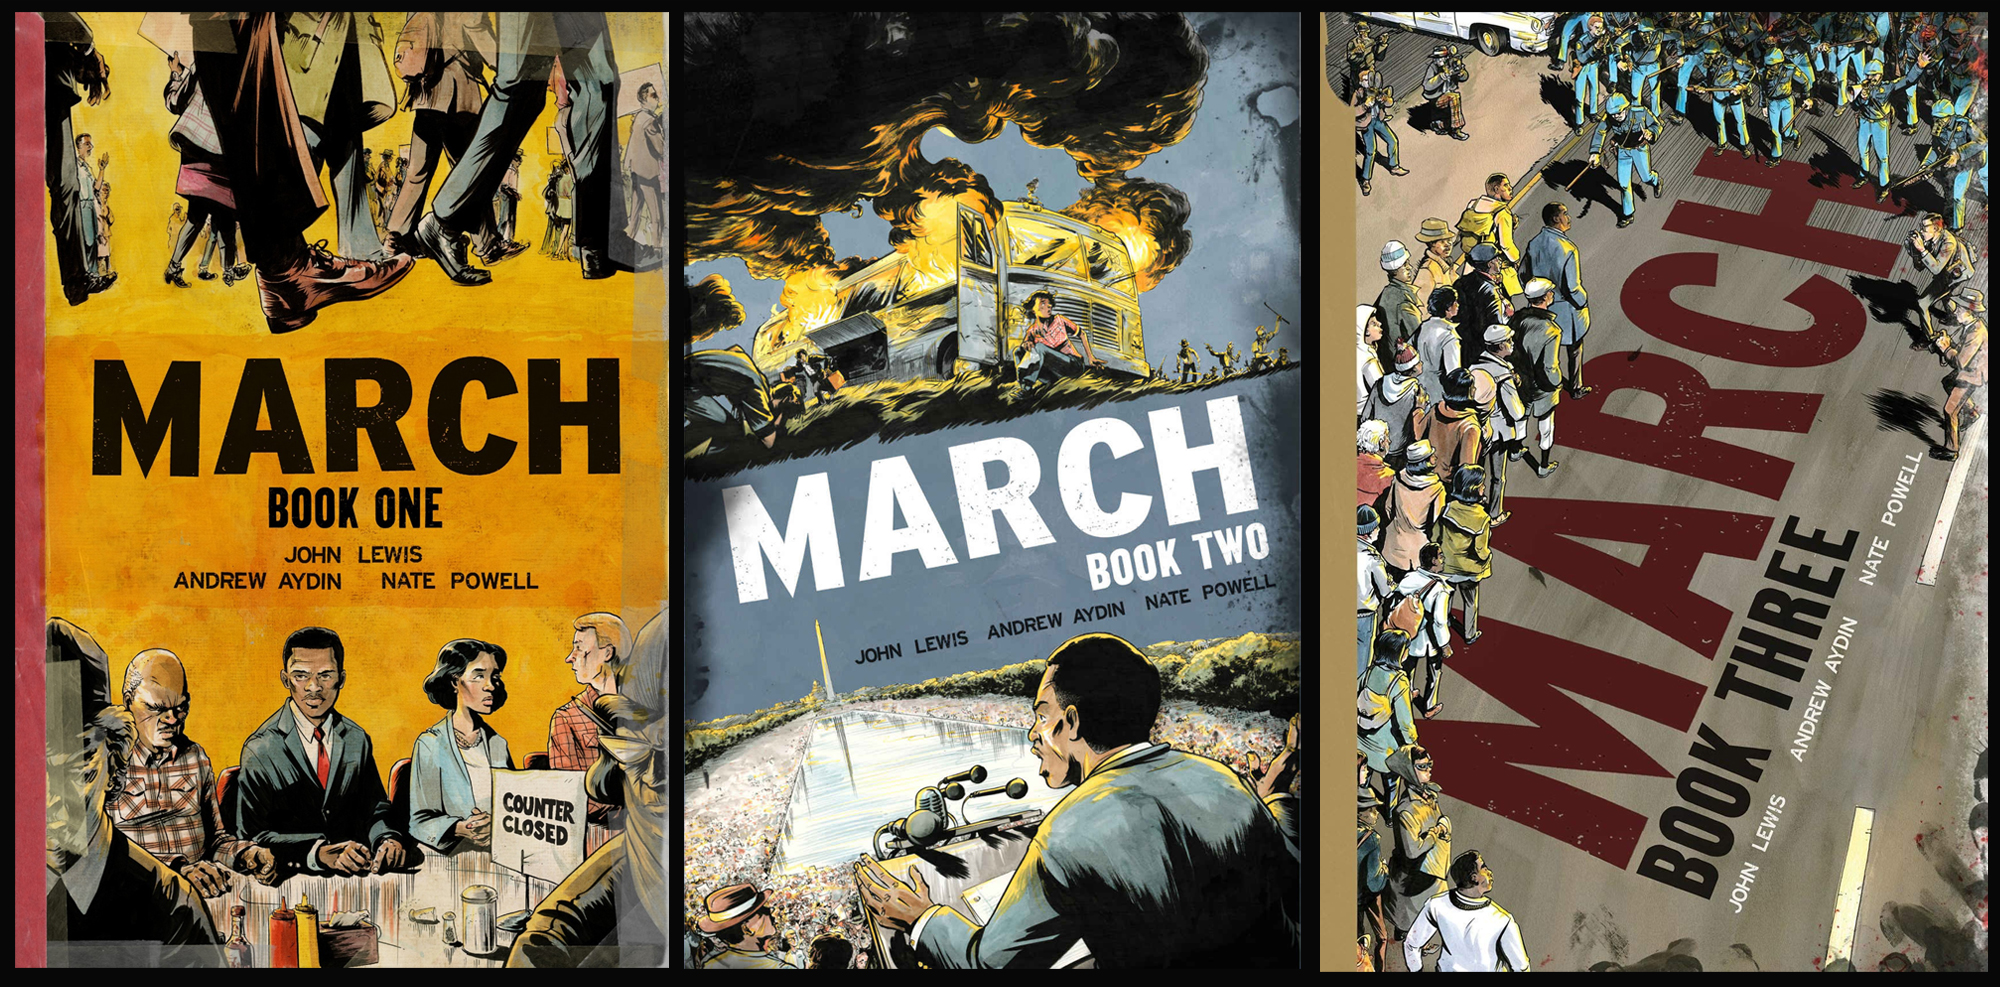 COVER: Three covers of each volume in the "March" trilogy. Covers courtesy of Top Shelf Productions. SOURCE: https://www.penguinrandomhouse.com/series/1MA/march